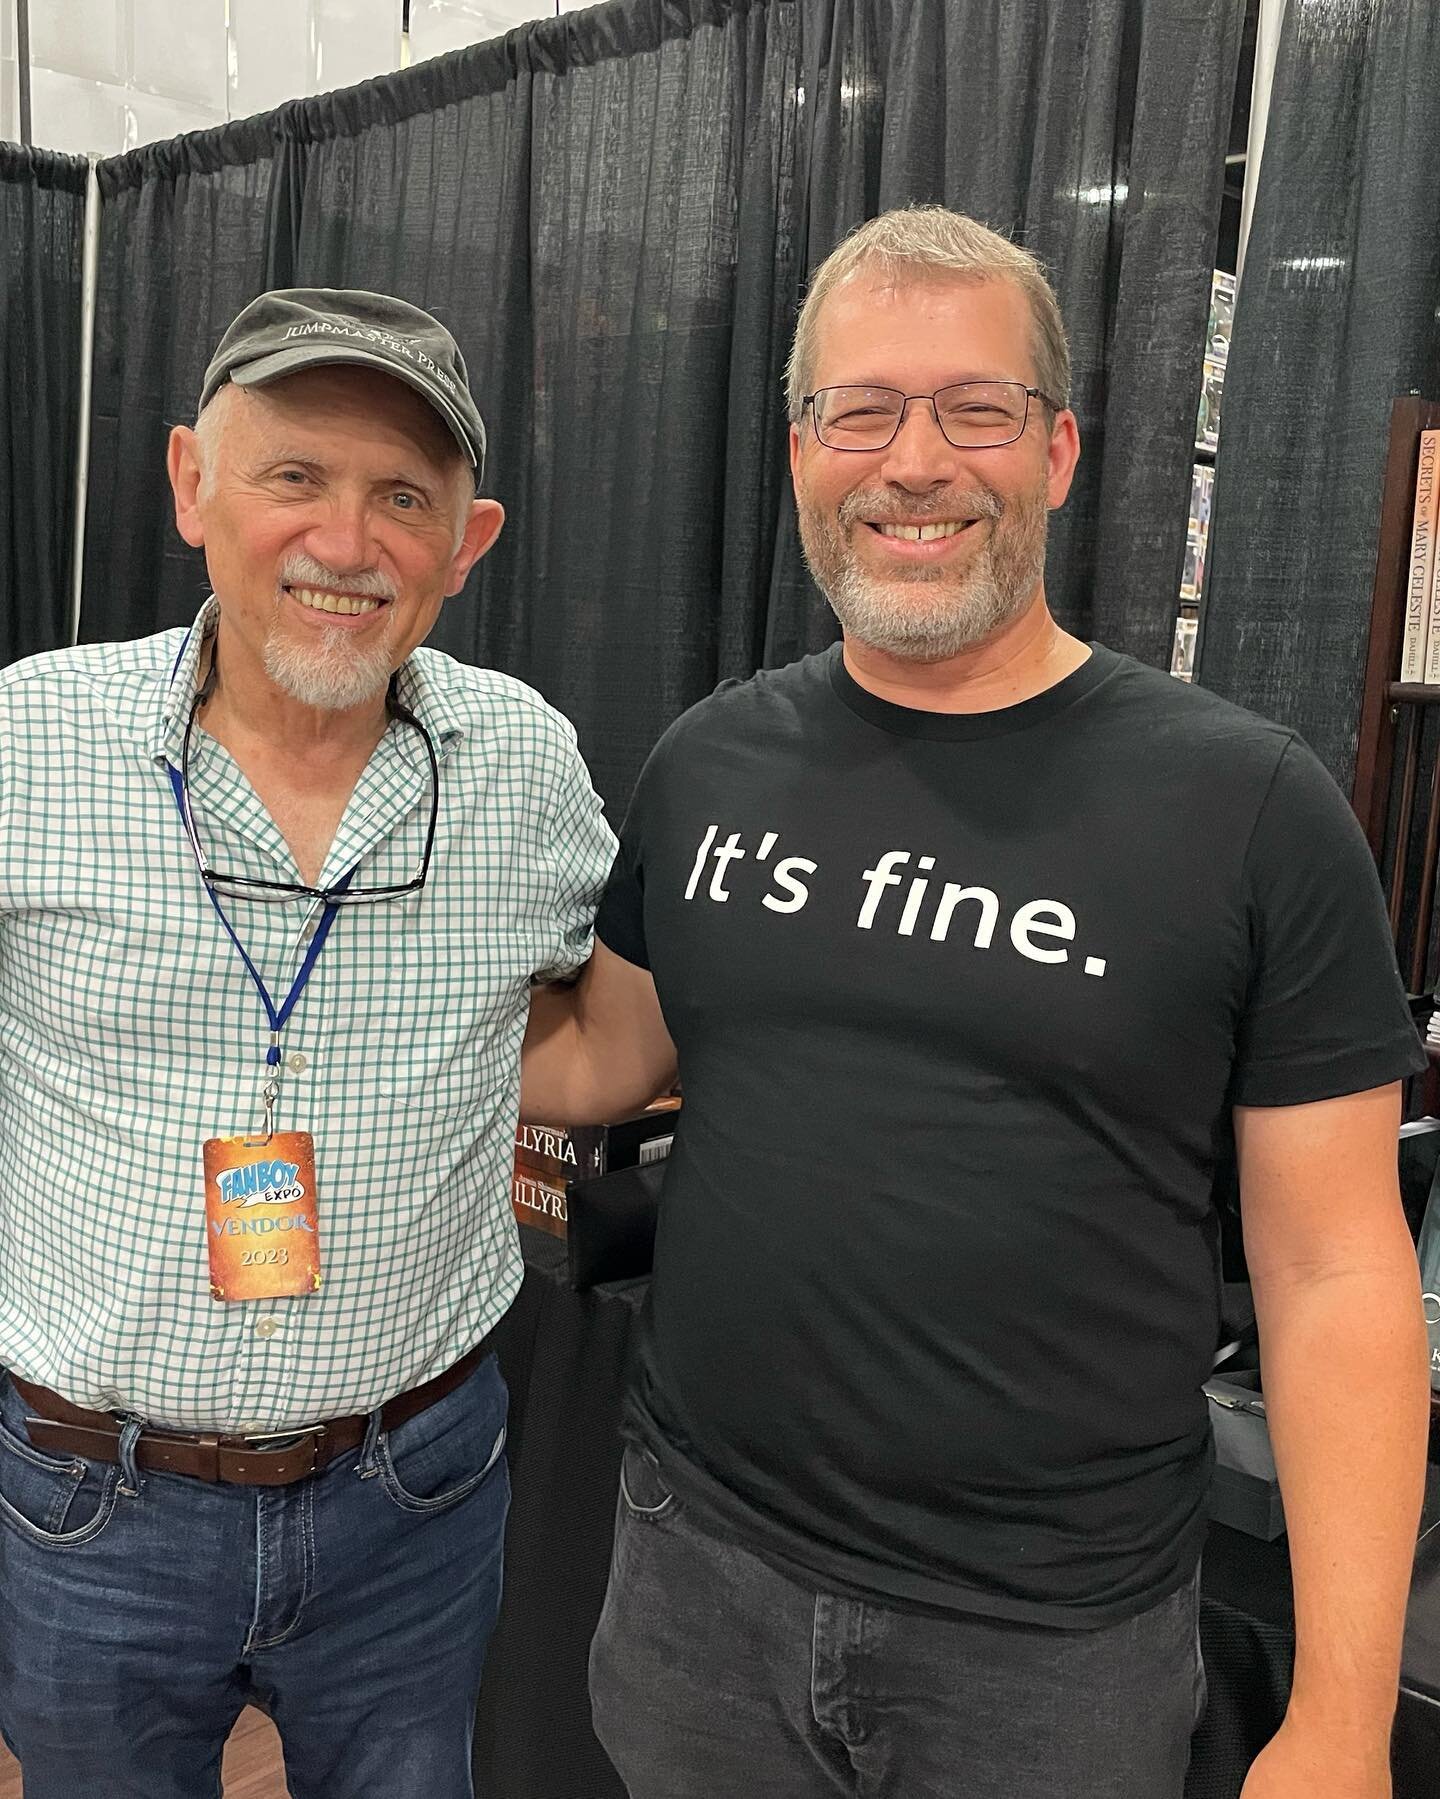 Great day meeting Armin Shimerman @jumpmasterpress and picking up his book, Betrayal of Angels! Bonus, I shared our &ldquo;horrible&rdquo;games with him &amp; he was kind enough to sign a card. Thank you for making my day! Let us know what you think 